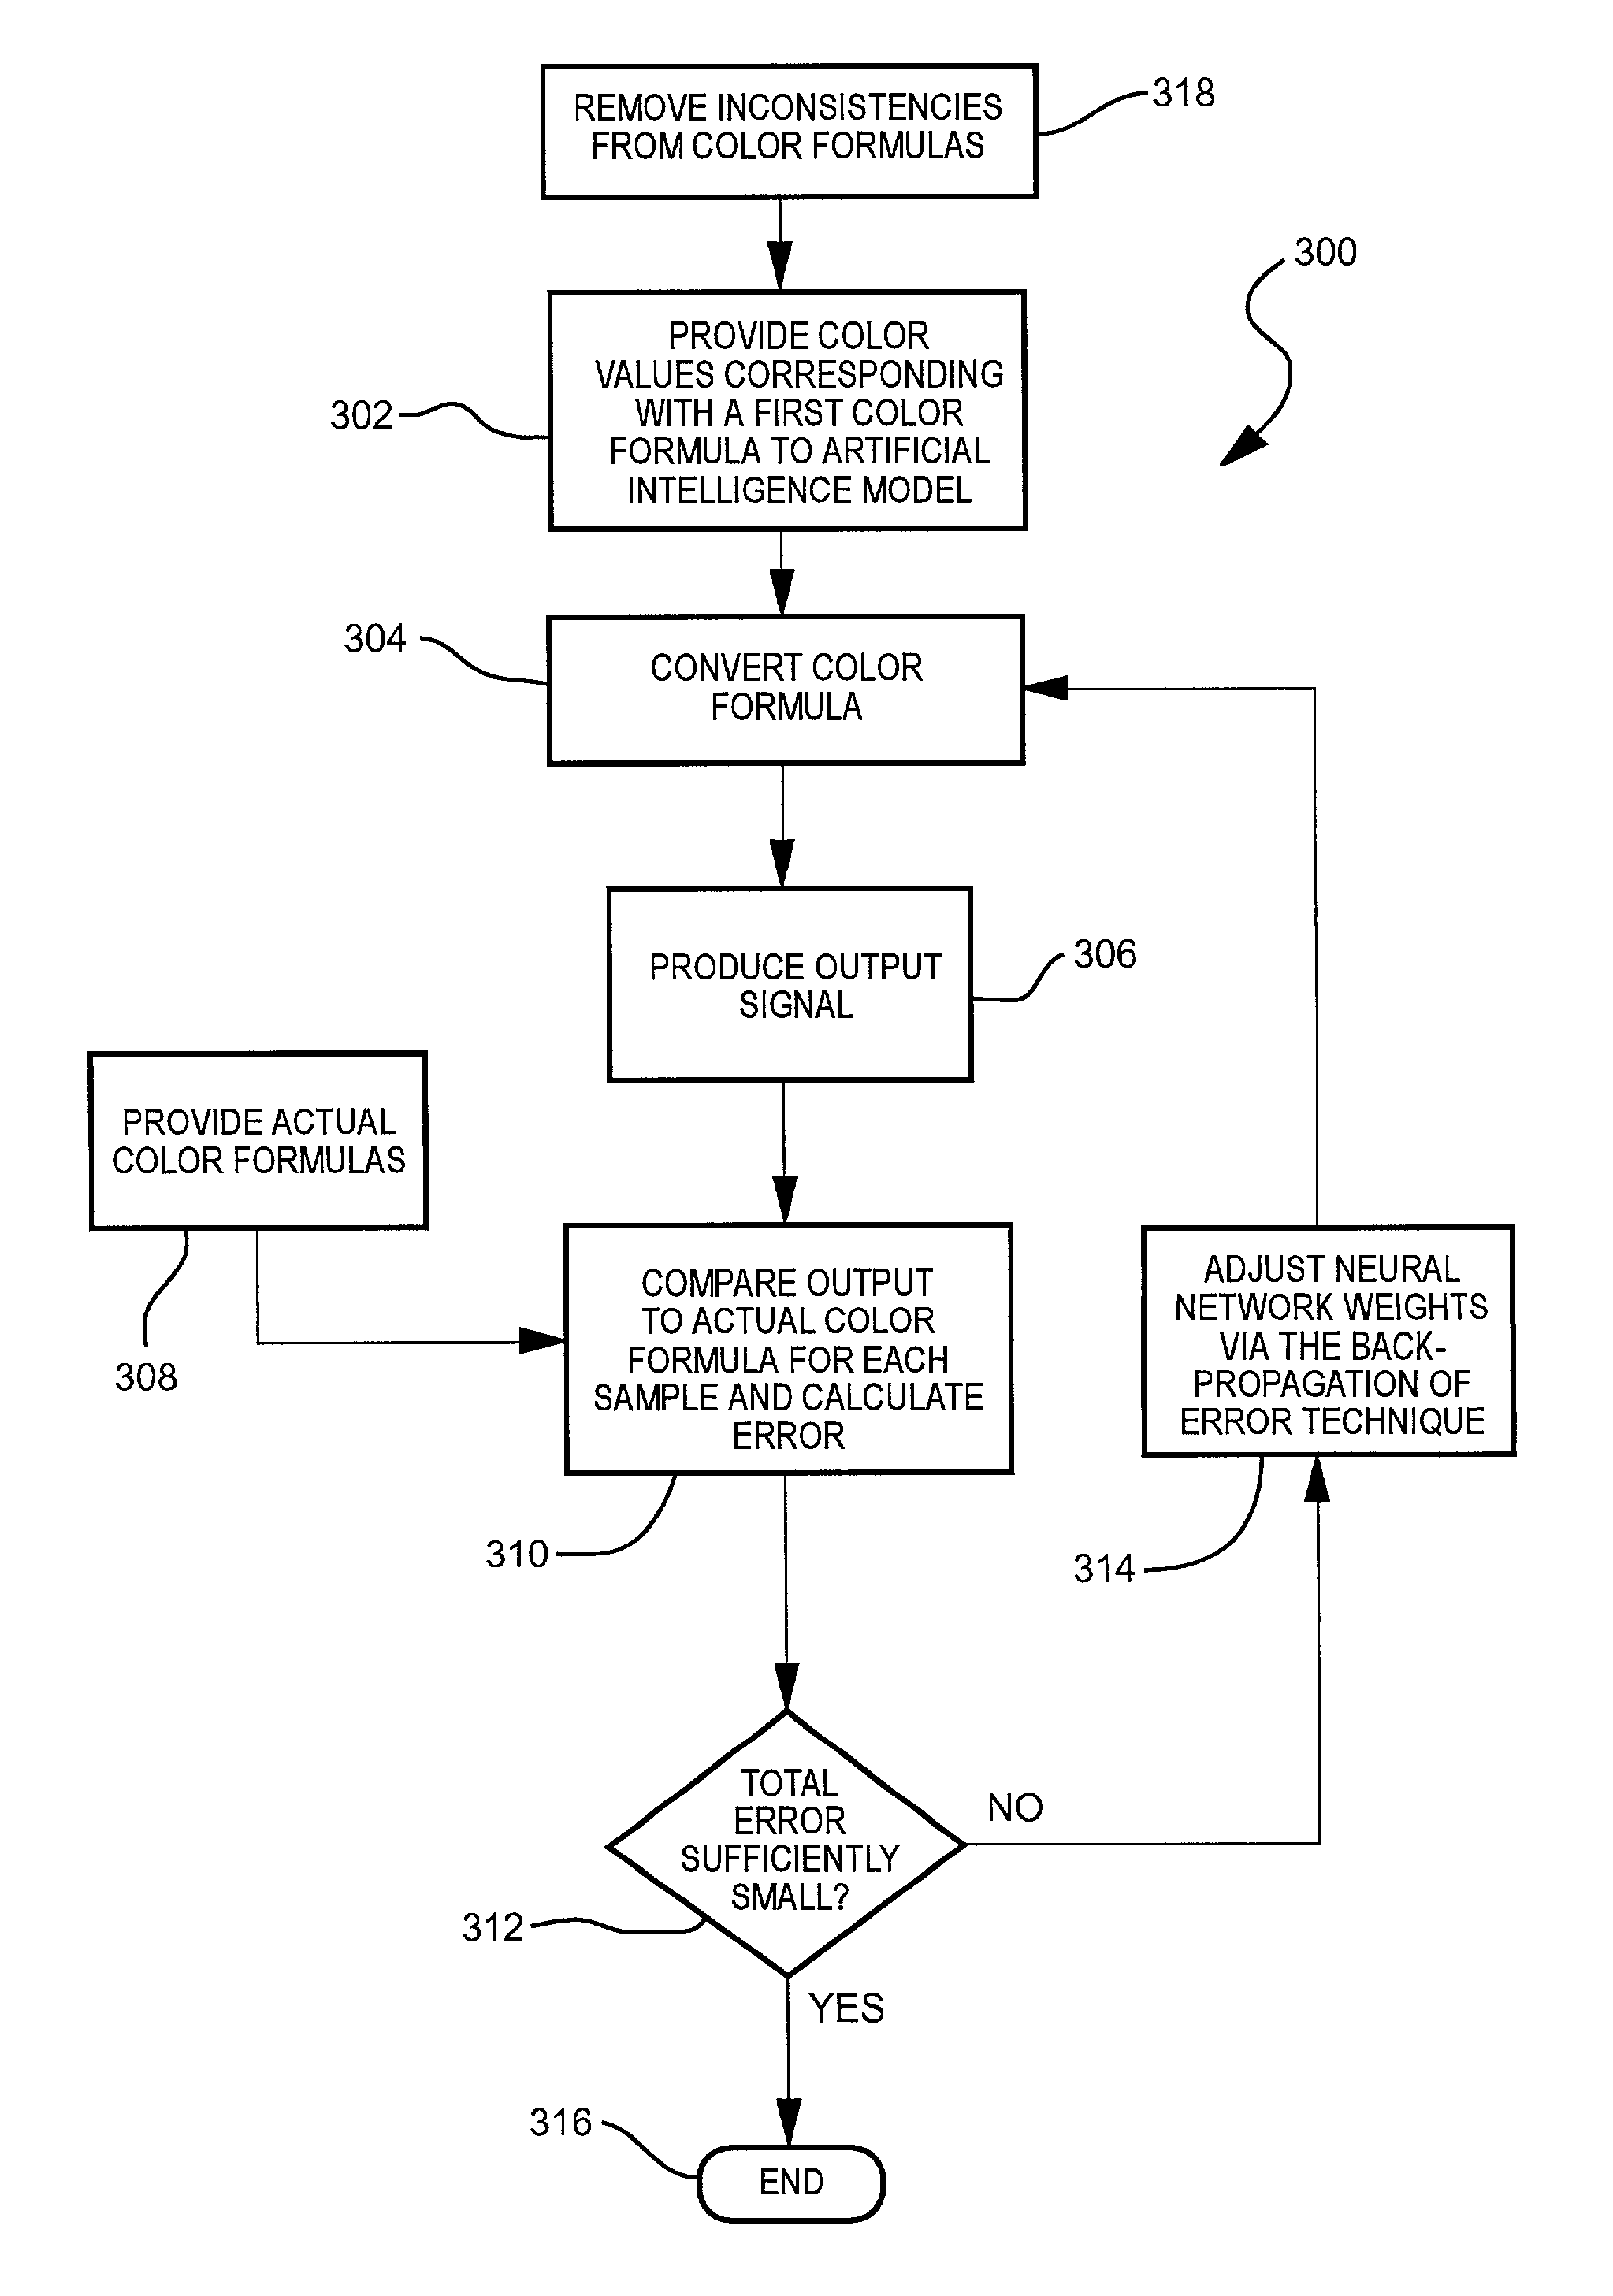 System and method for converting a color formula using an artificial intelligence based conversion model